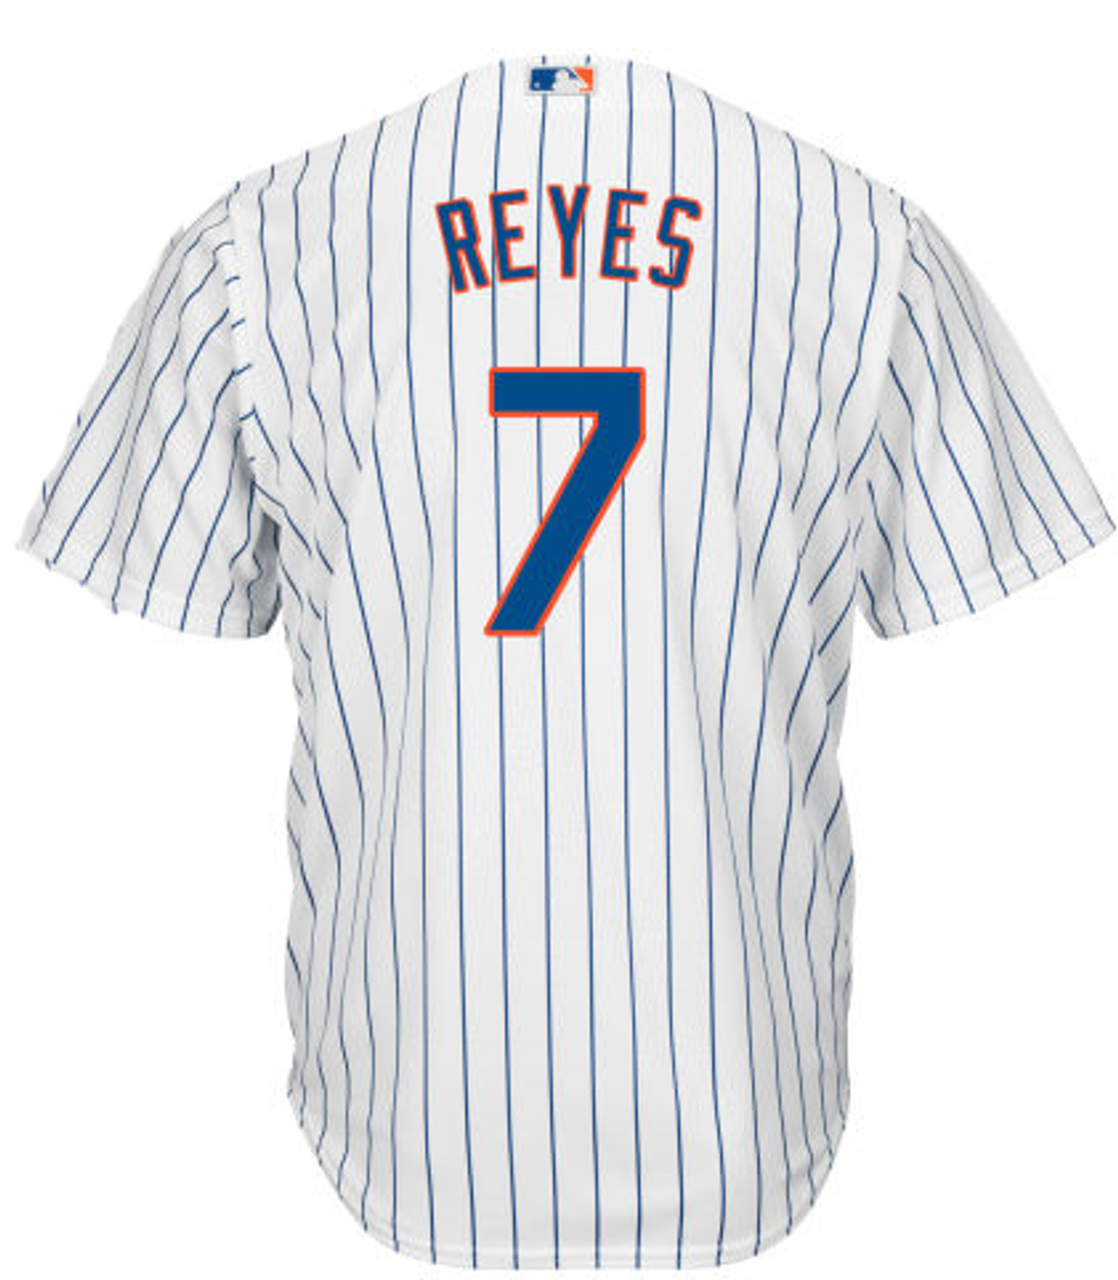 Darryl Strawberry Jersey - NY Mets Replica Adult Home Jersey